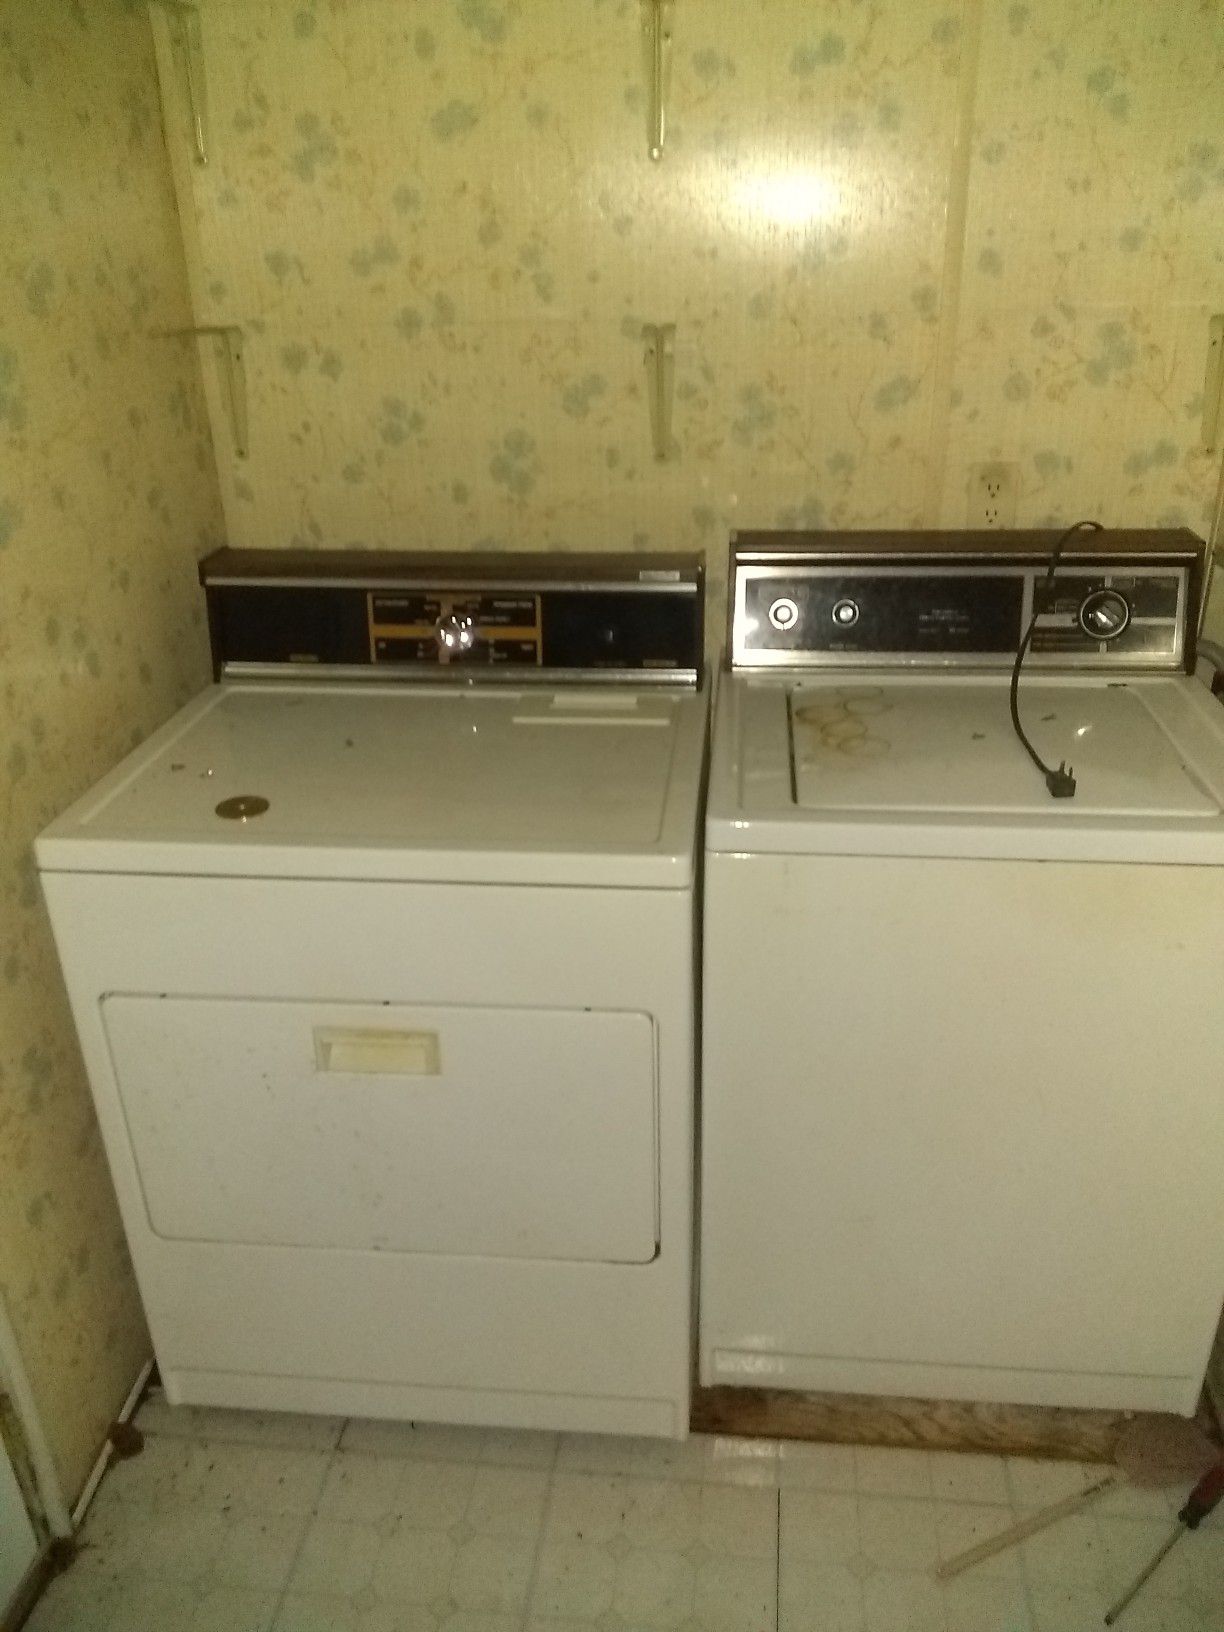 Kinmore washer an dryer